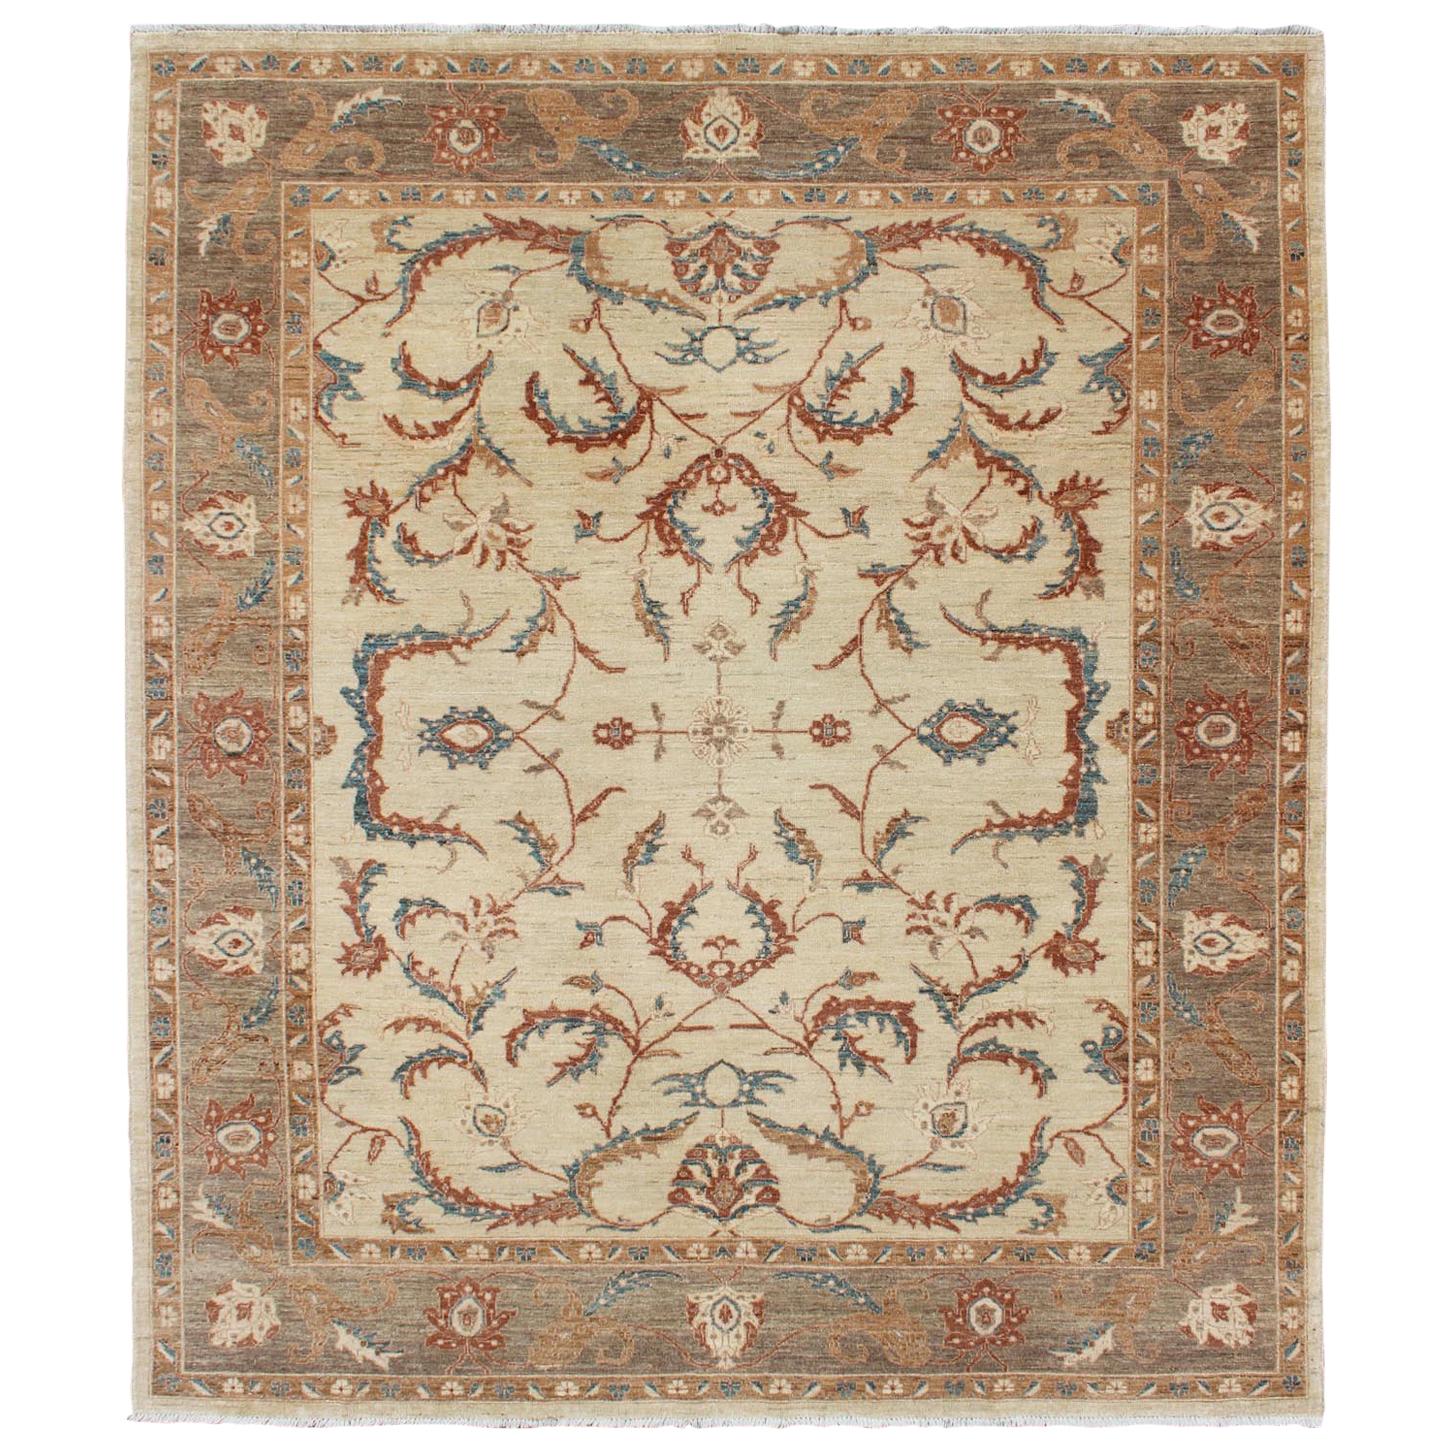 Fine Afghanistan Made Rug in Earthy Tones of Brown, Taupe, Blue, and Coral